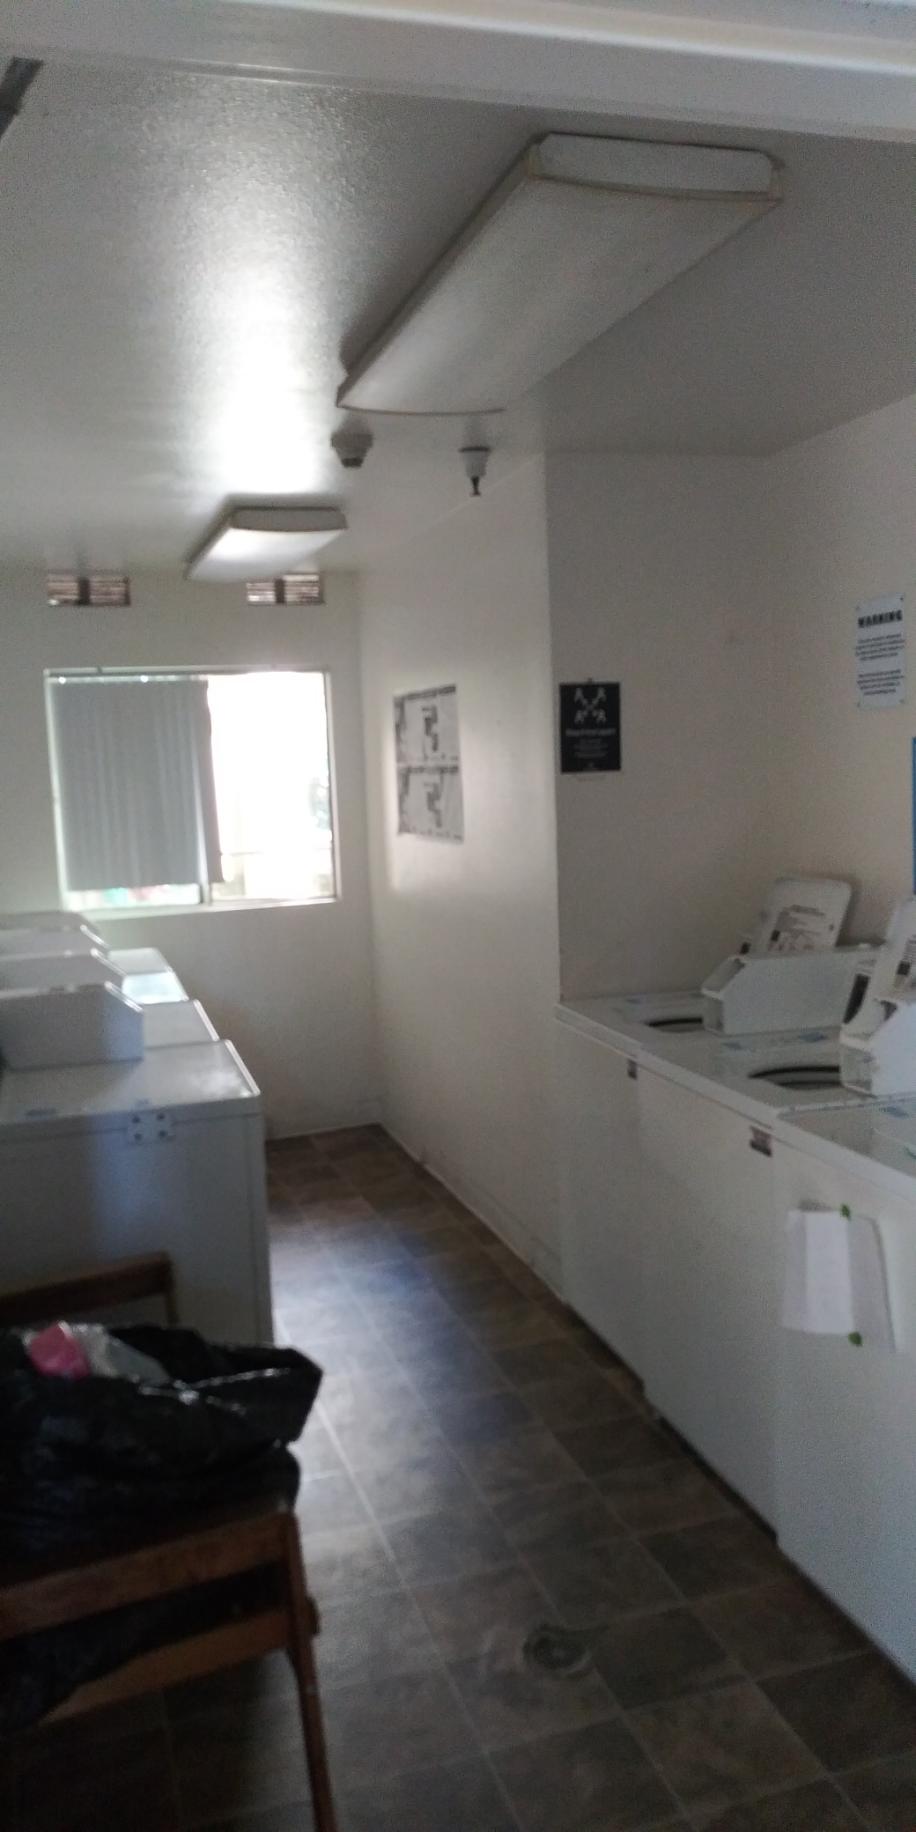 Laundry room with six machines acroos from each other. There is a window with blinds, and the floor is tiled.